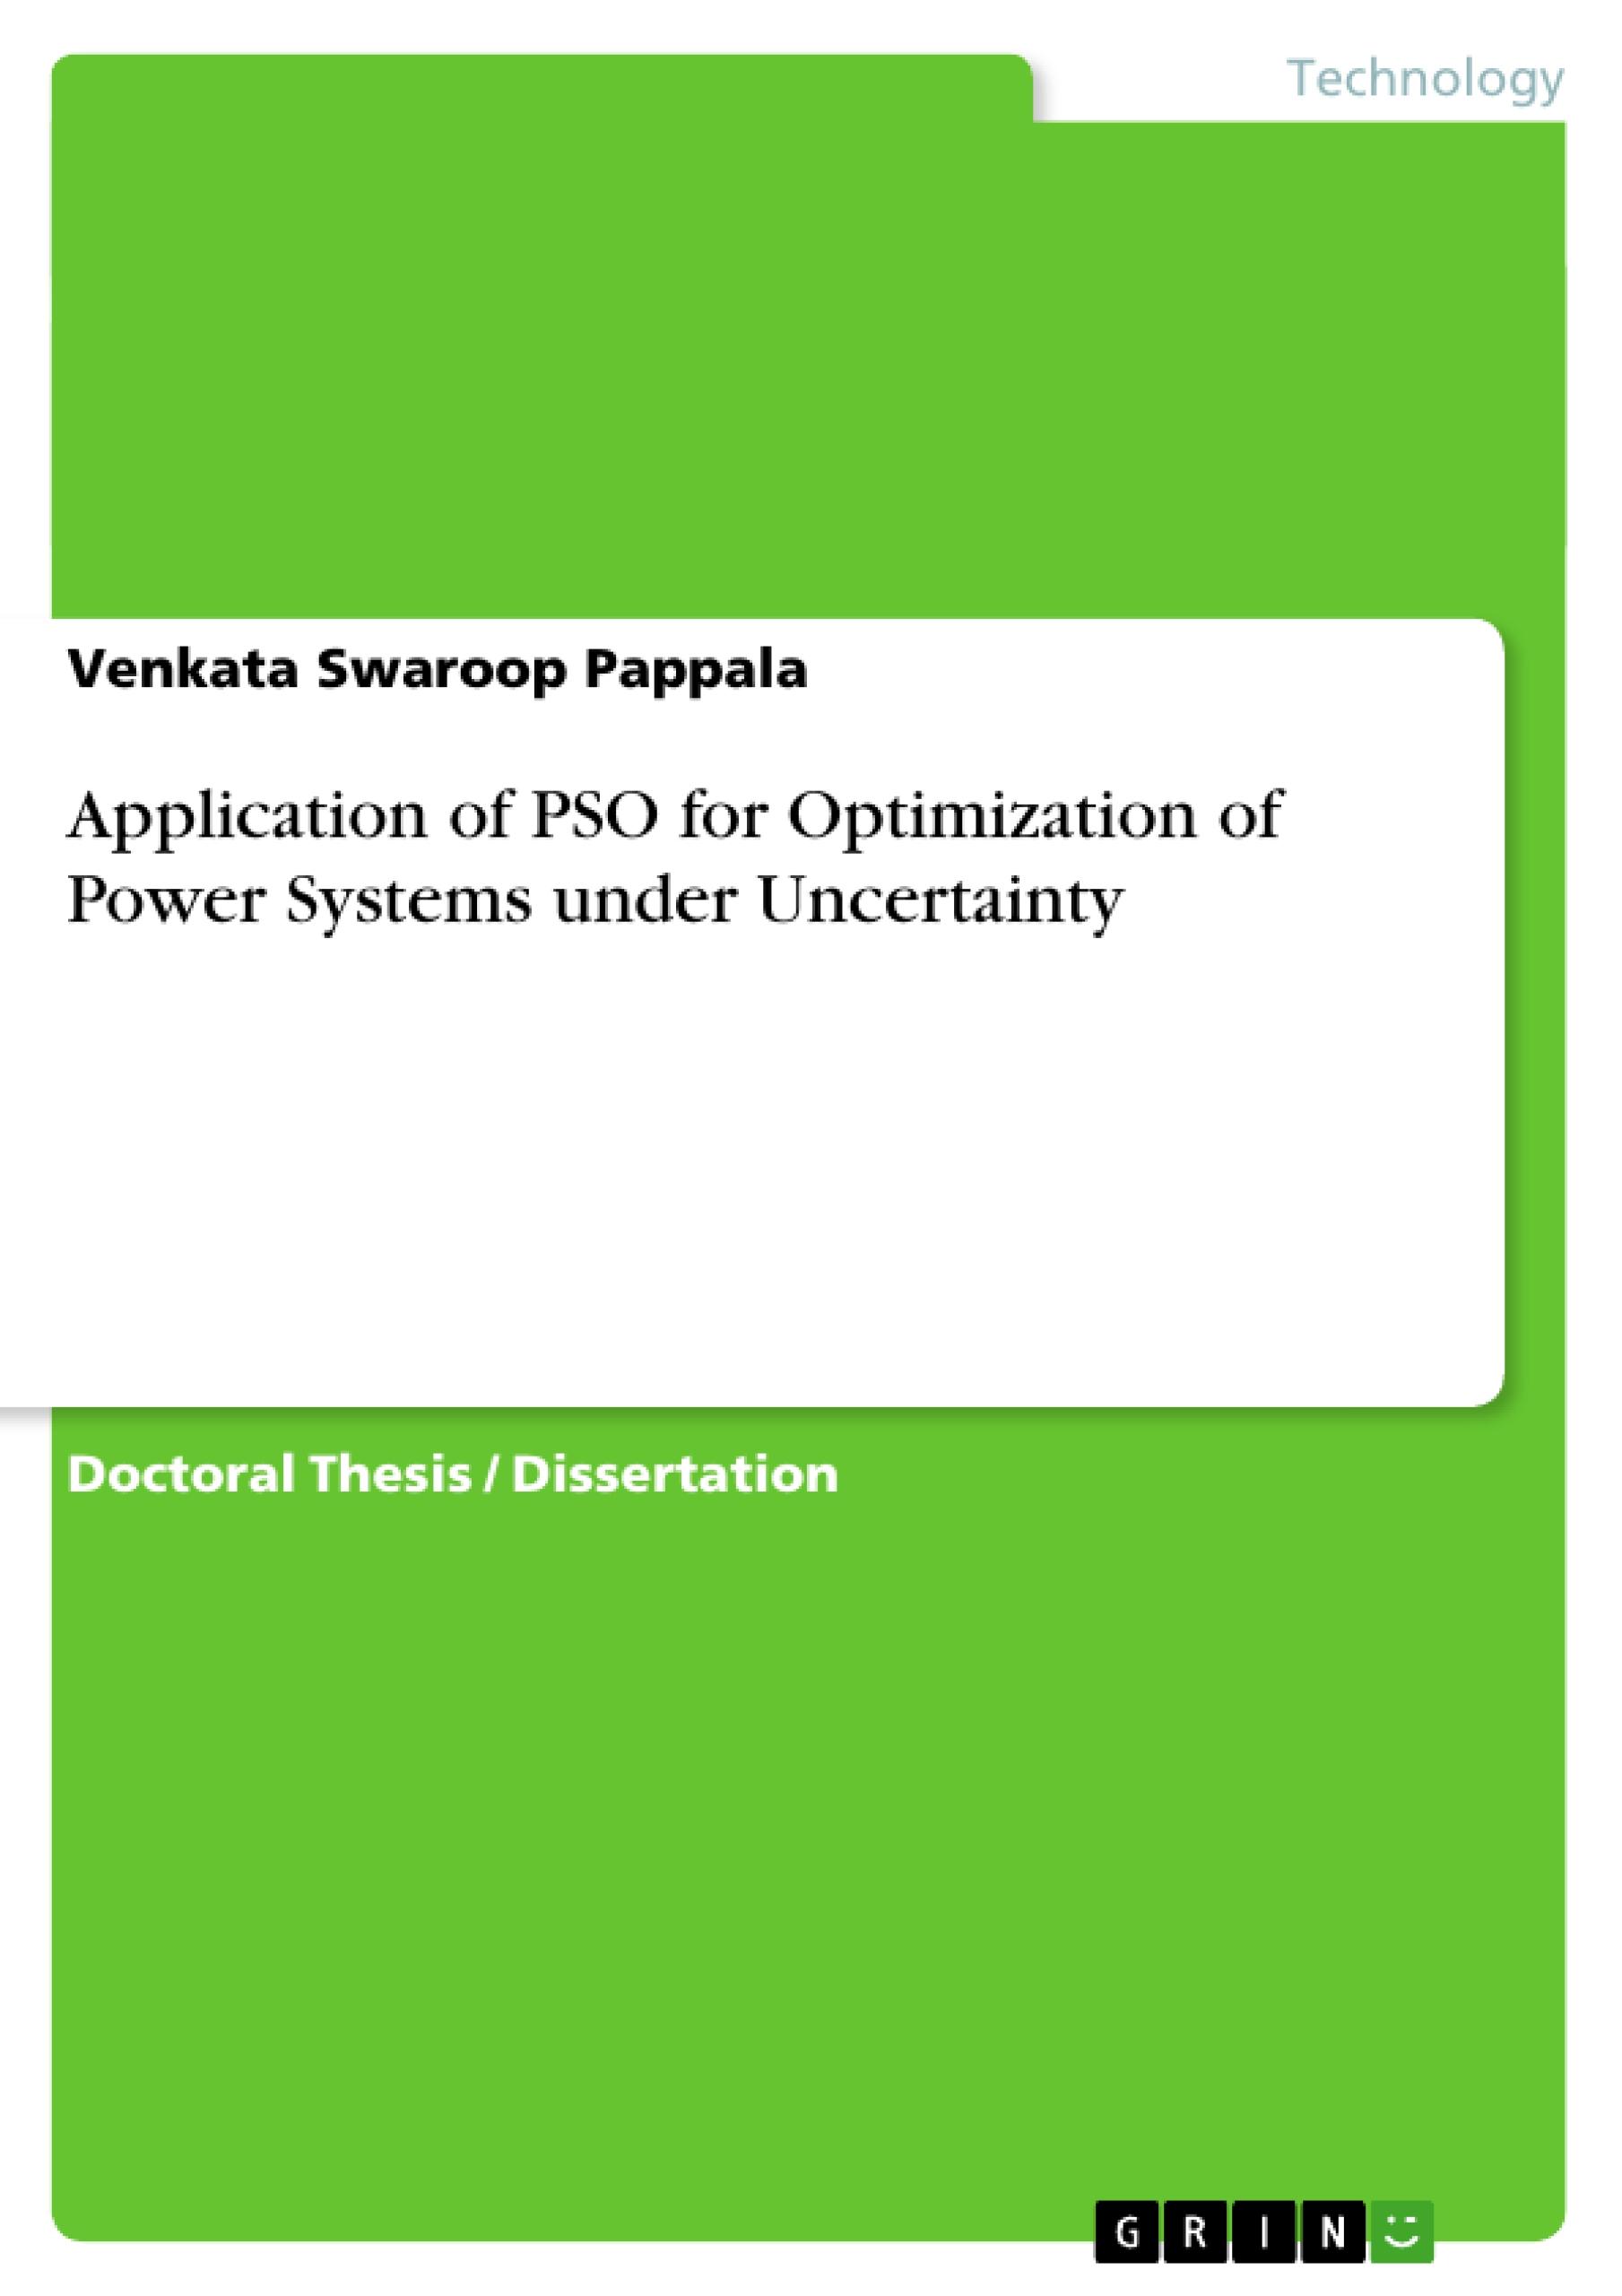 Application of PSO for Optimization of Power Systems under Uncertainty - Pappala, Venkata Swaroop